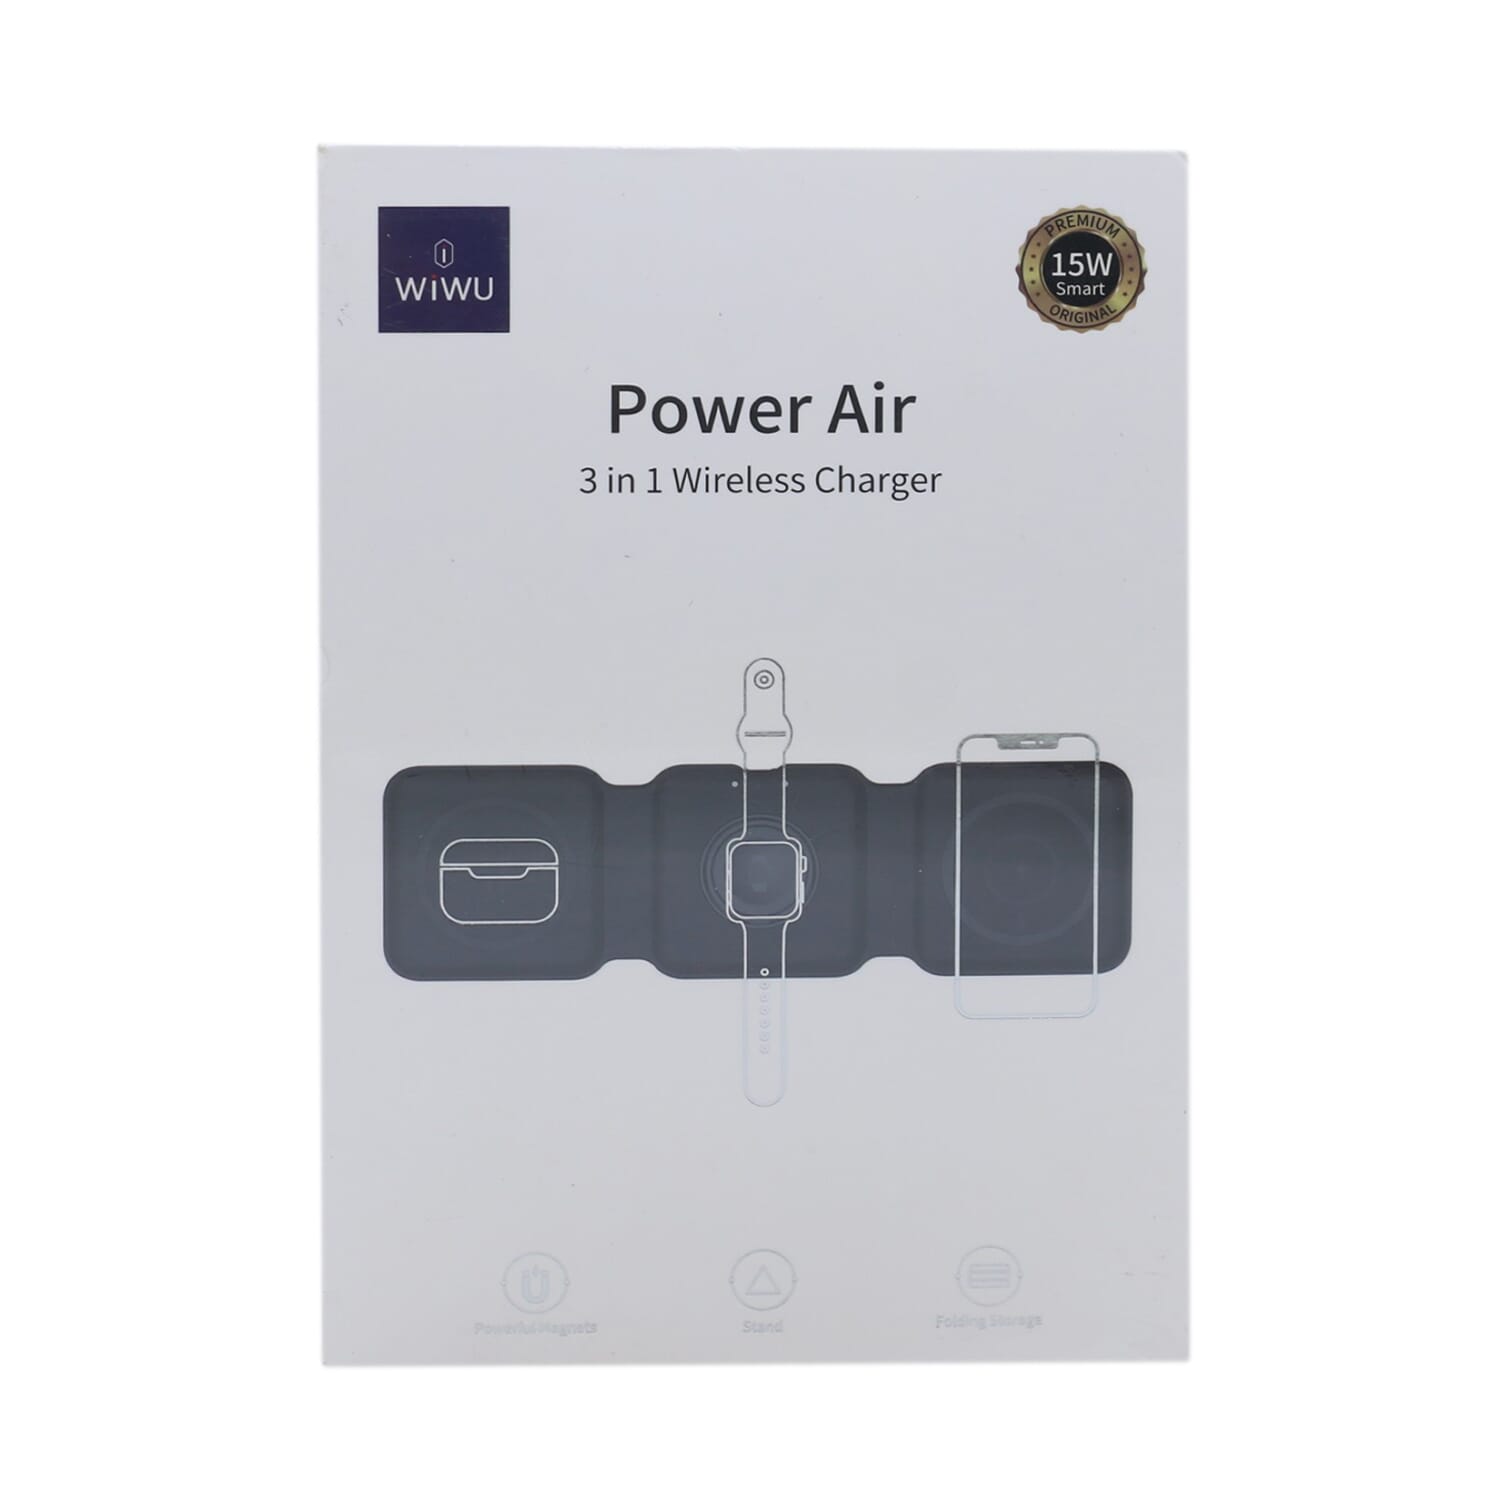 WIWU POWER AIR 3 IN 1 WIRELESS SMART CHARGER 15W